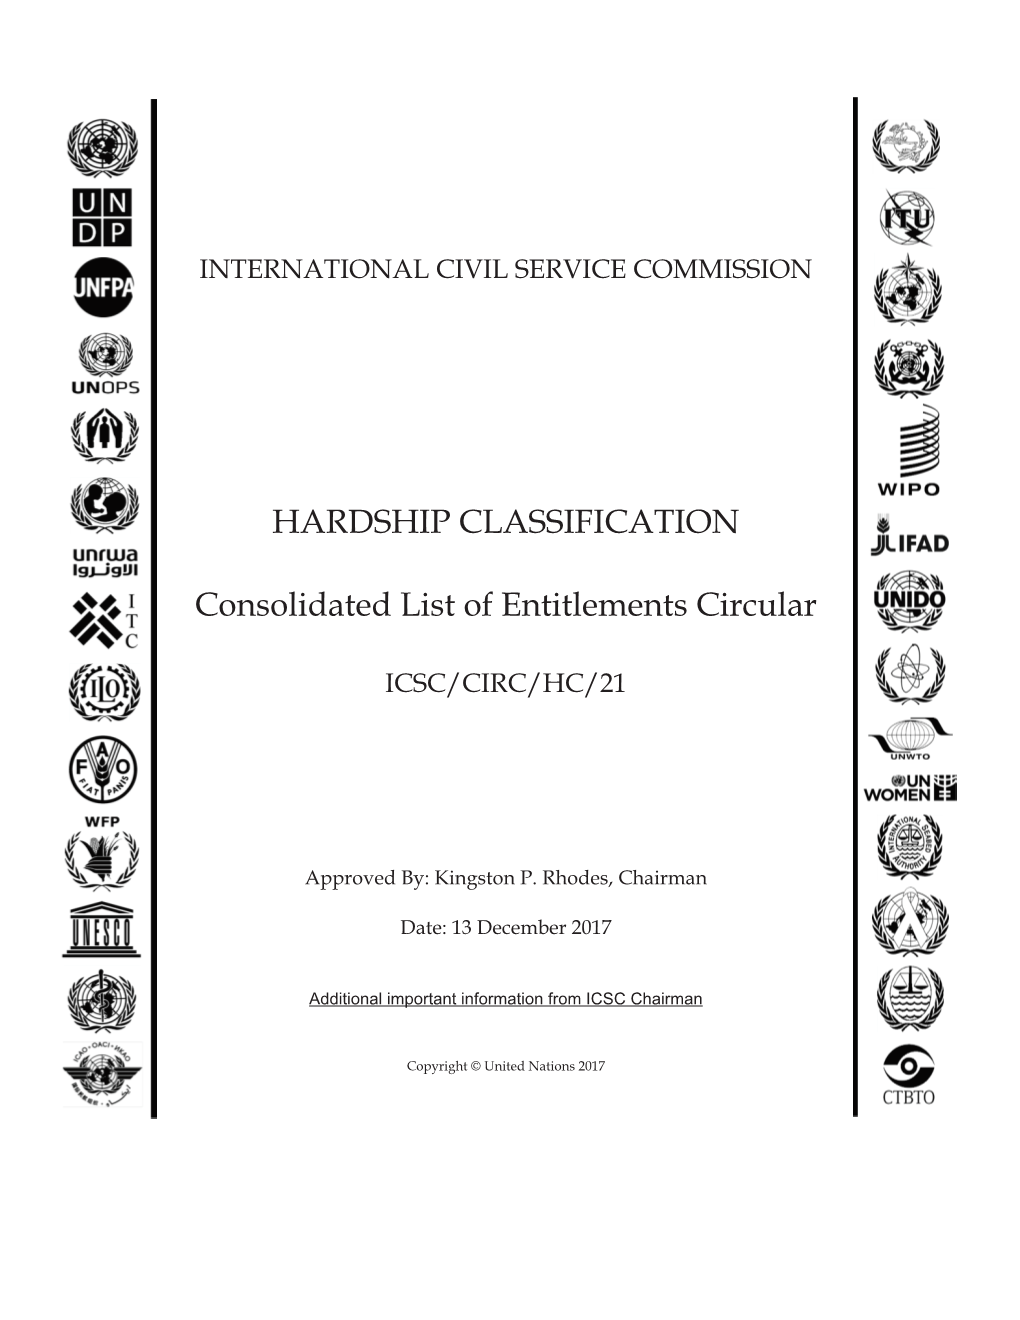 HARDSHIP CLASSIFICATION Consolidated List of Entitlements